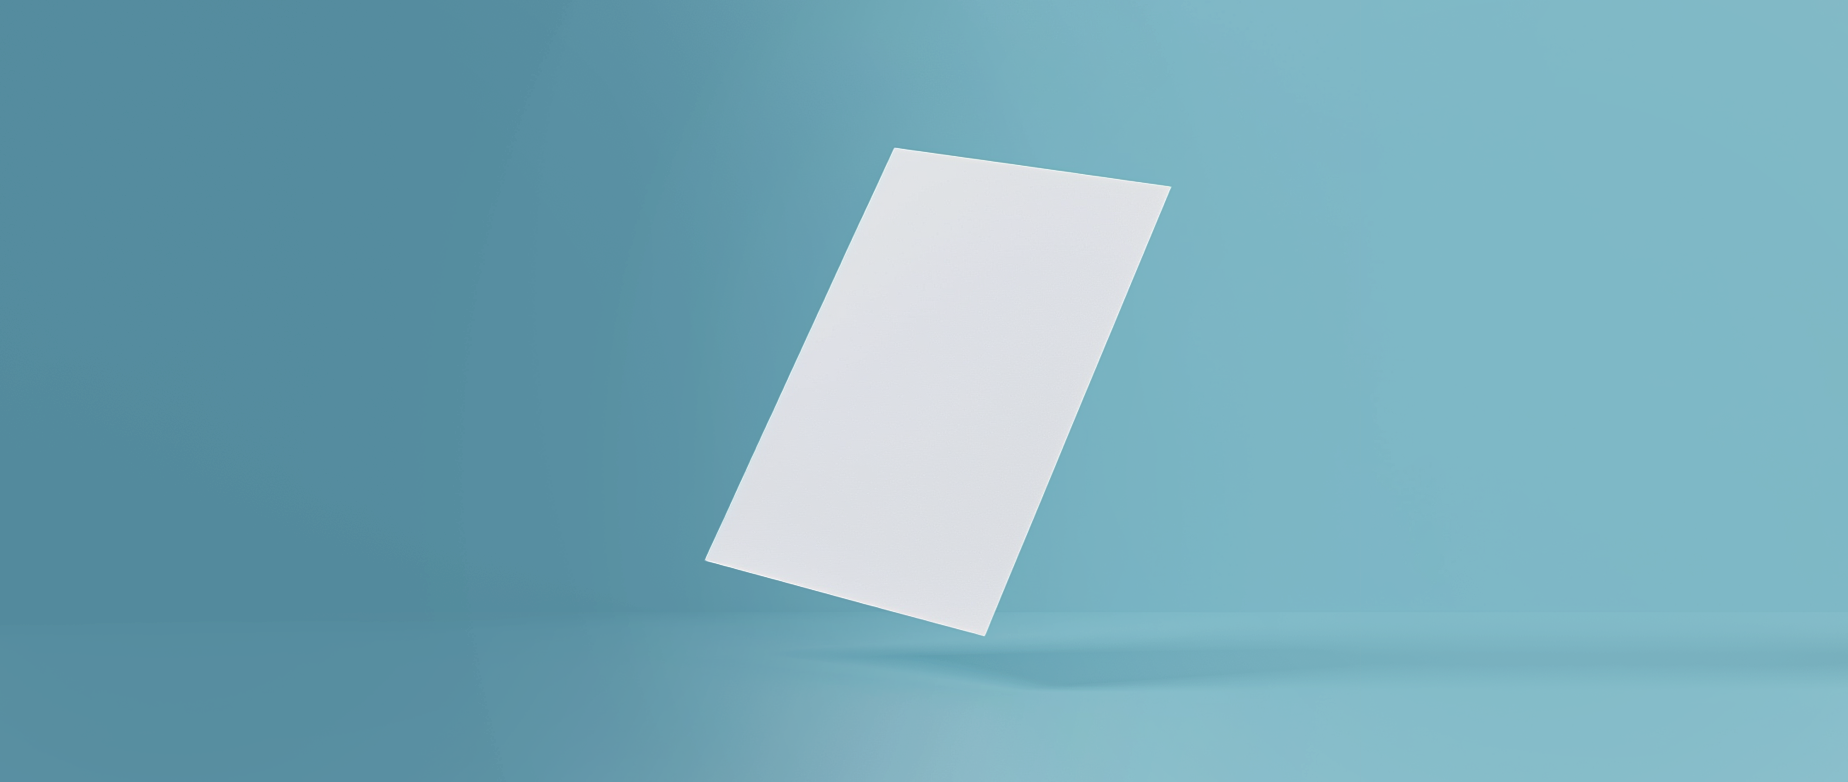 A blank white piece of paper on a blue background.